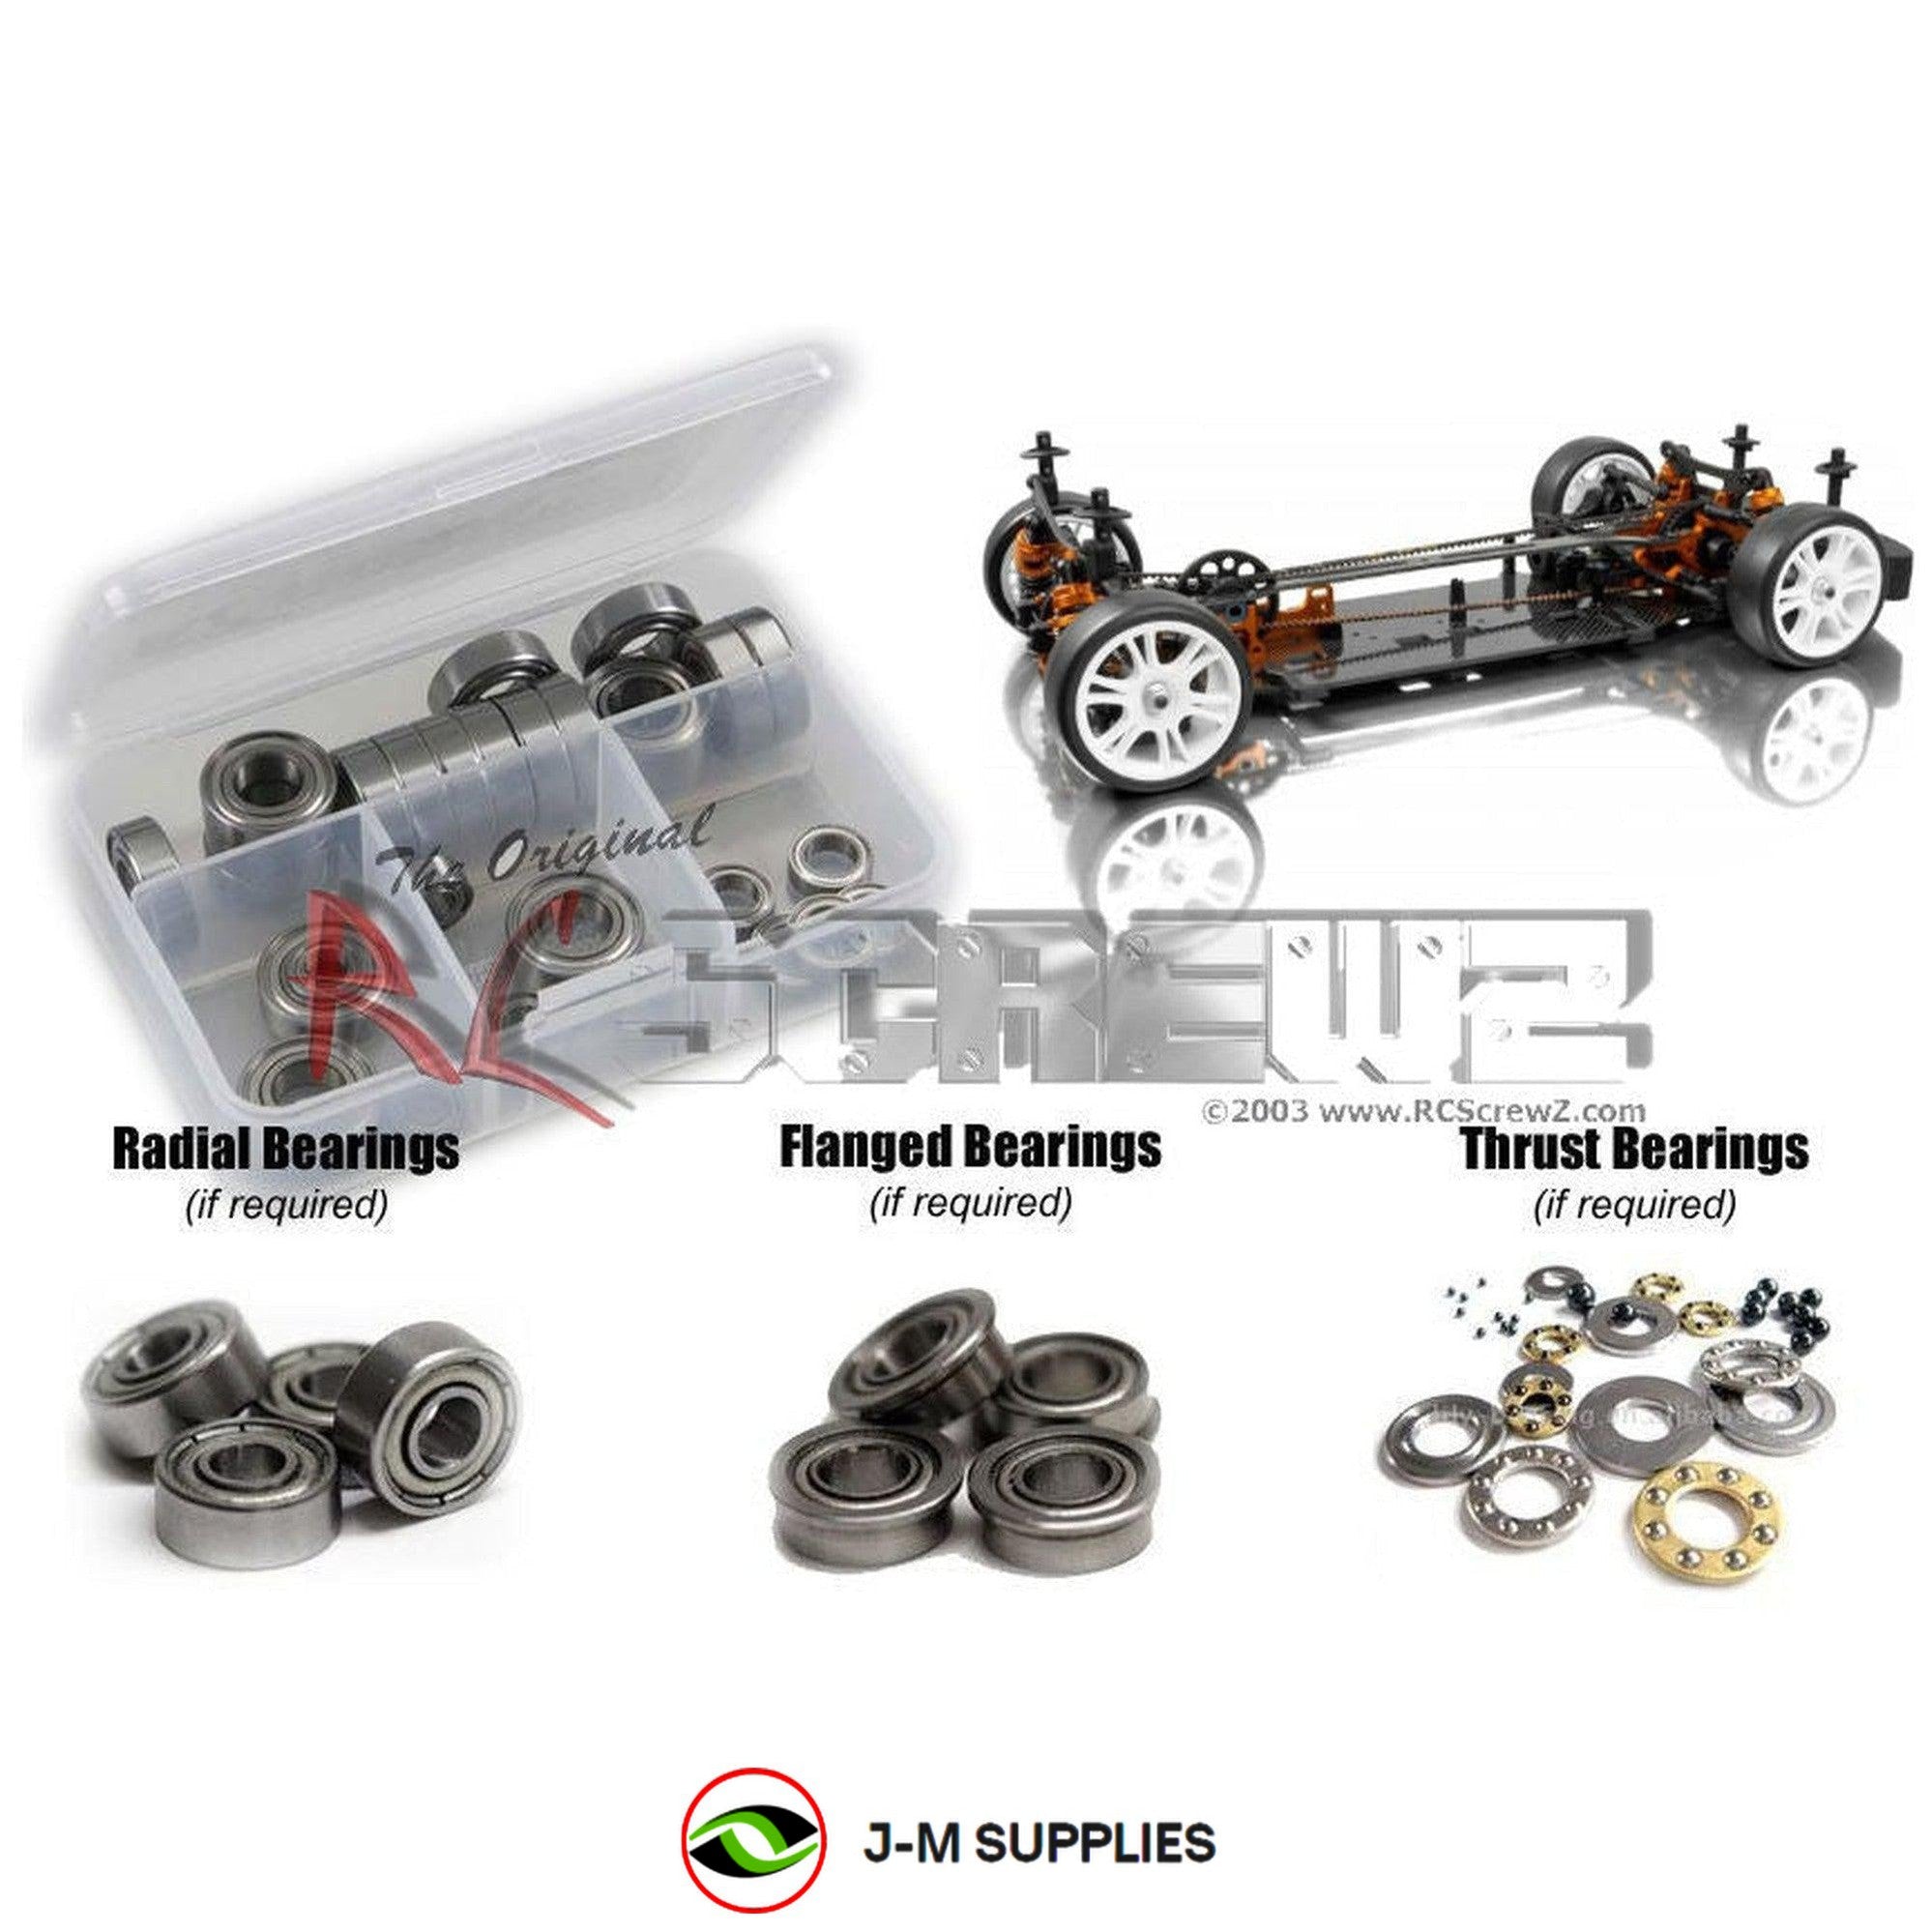 RCScrewZ Metal Shielded Bearing Kit xra020b for XRAY T3 2012 #300018 | PRO - Picture 1 of 12